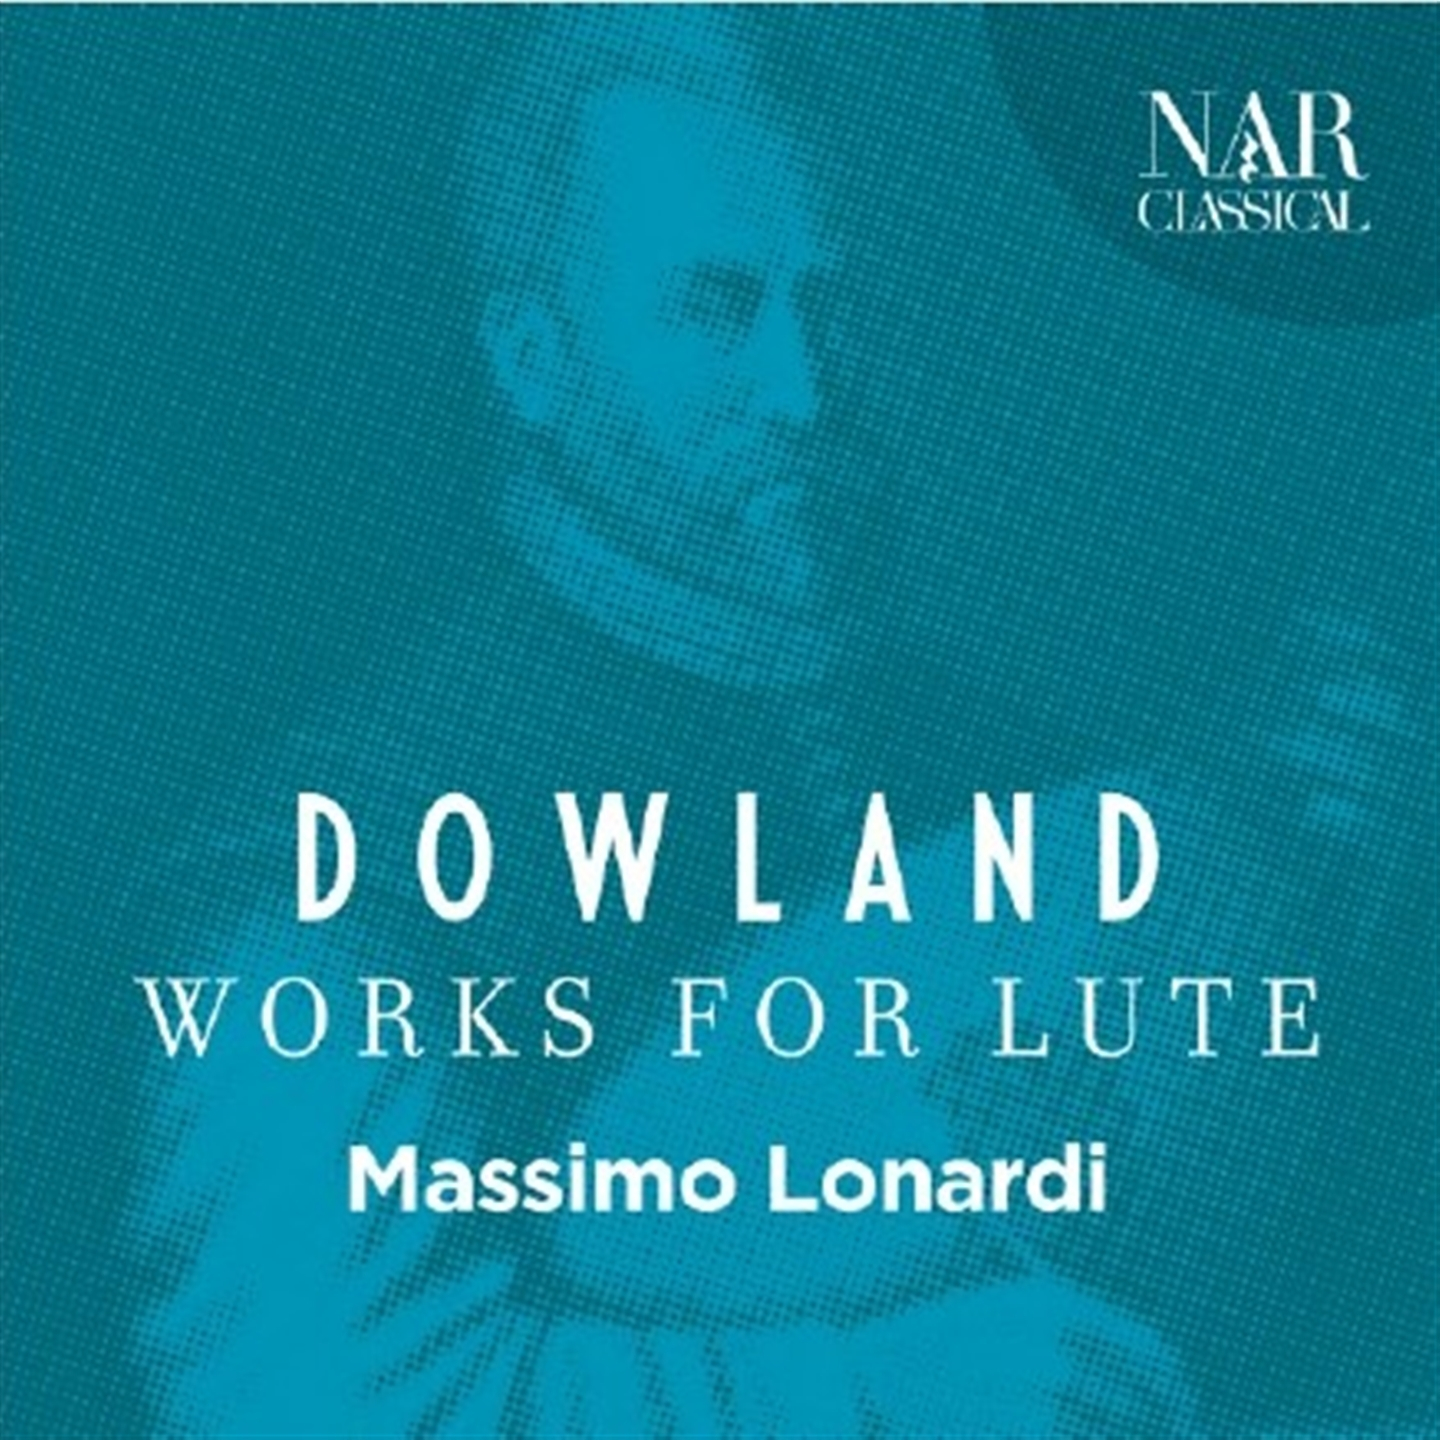 WORKS FOR LUTE